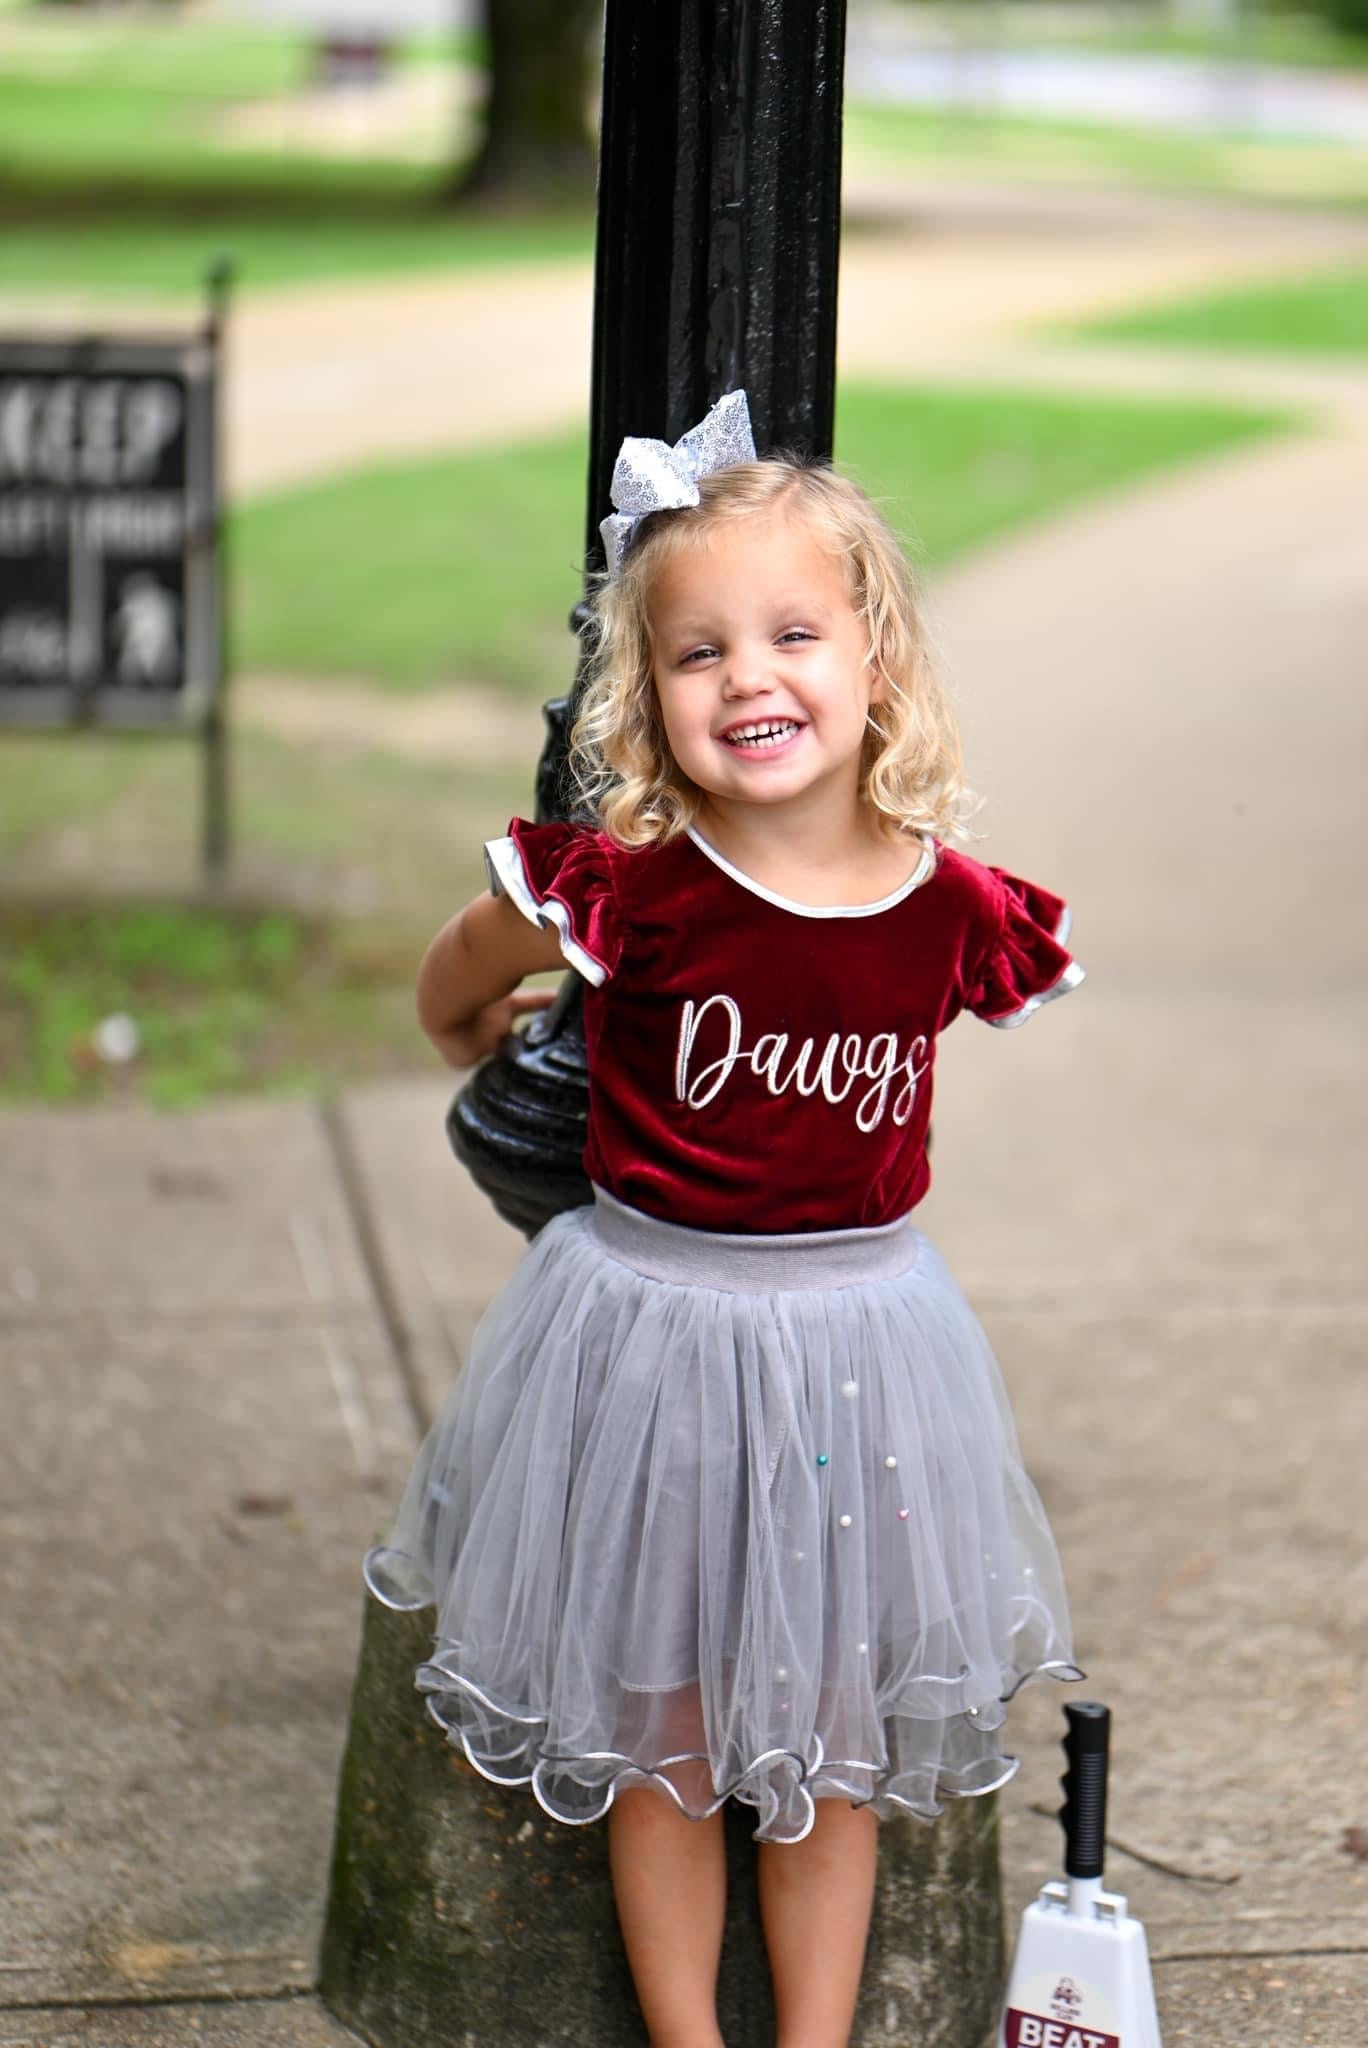 Go Dawgs Maroon and Silver Embroidered Velvet Shirt - Evie's Closet Clothing